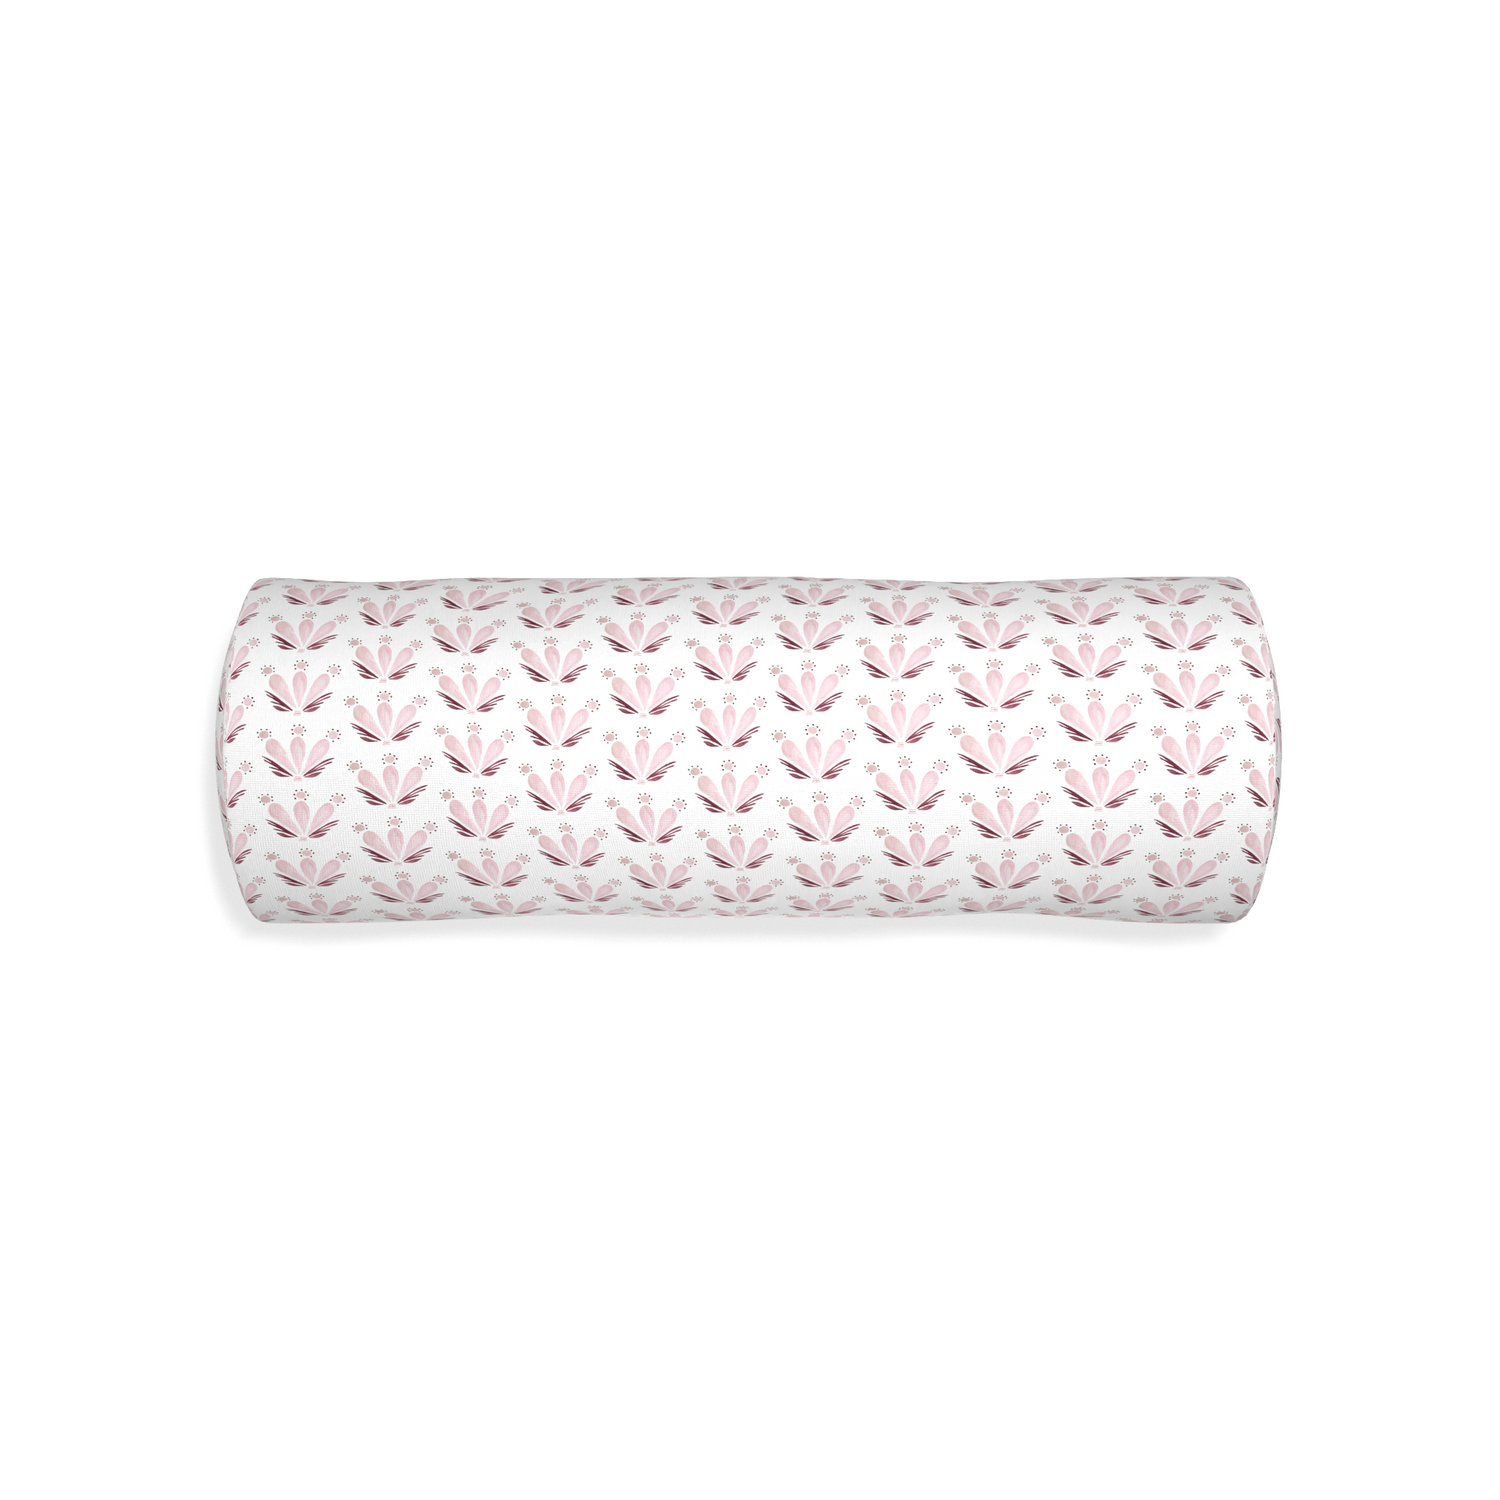 Bolster serena pink custom pillow with none on white background